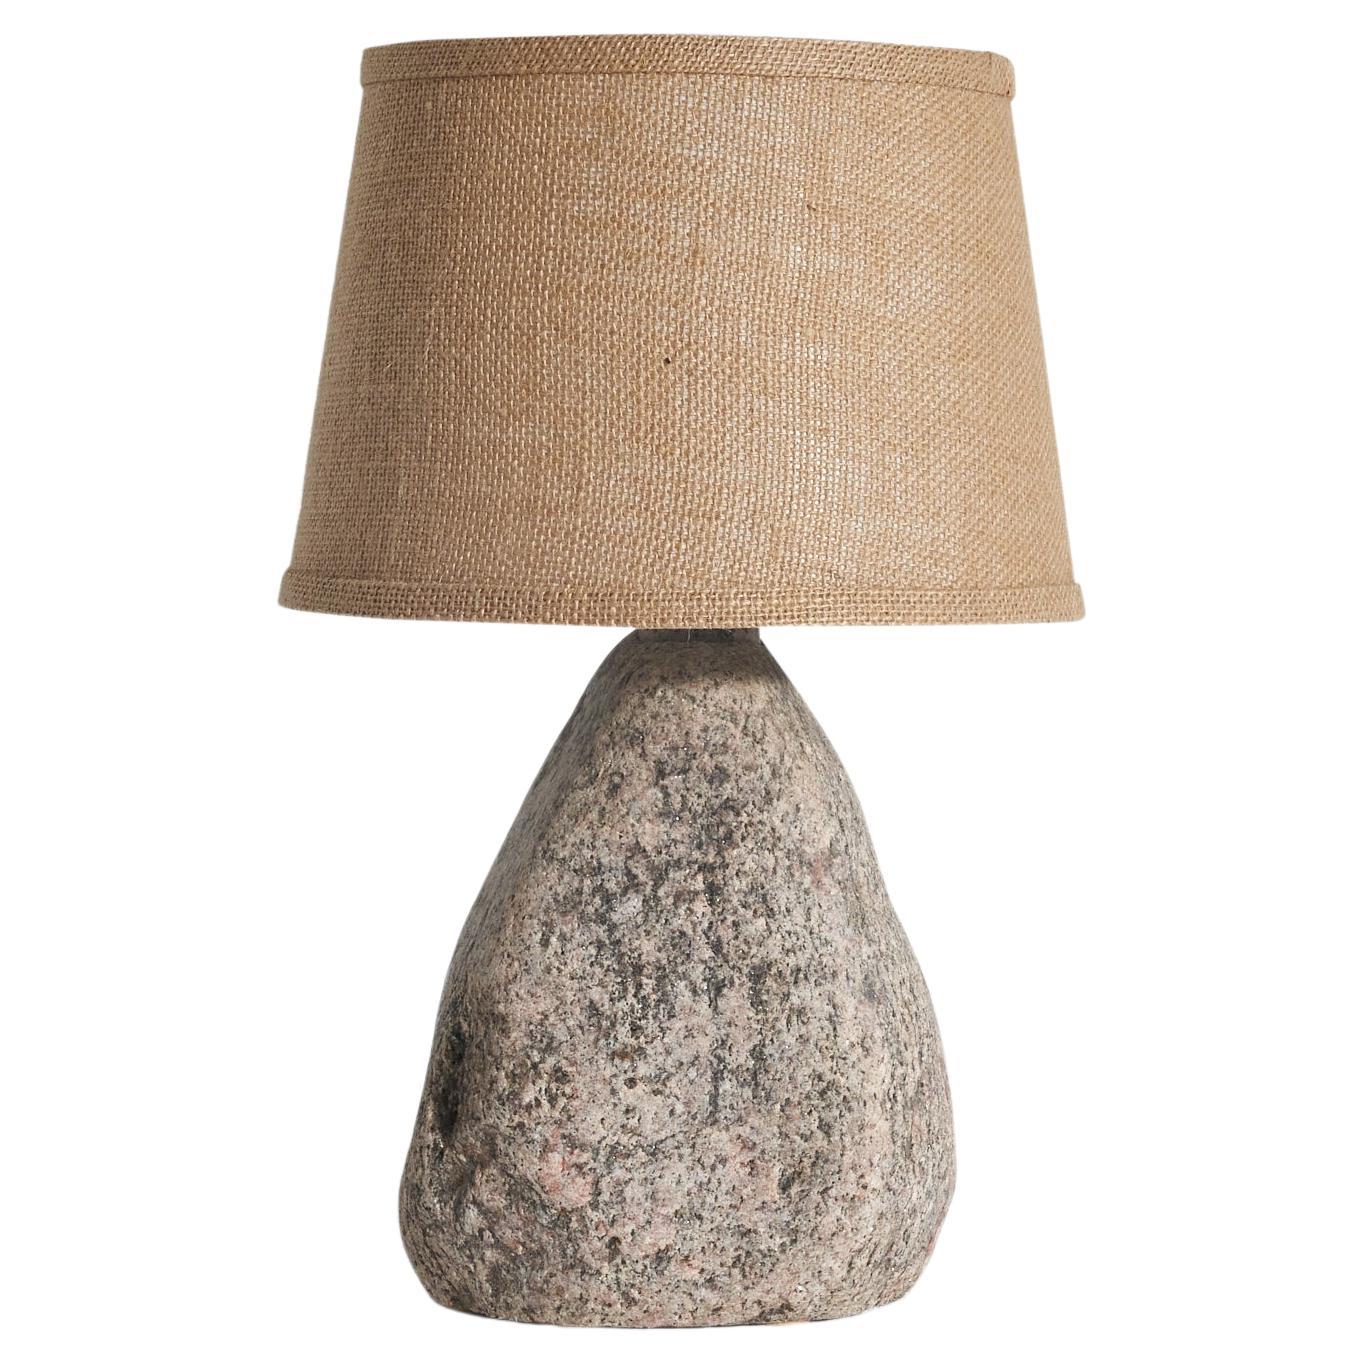 Svane Stone AB, Table Lamp, Stone, Fabric, Sweden, c. 1970s For Sale